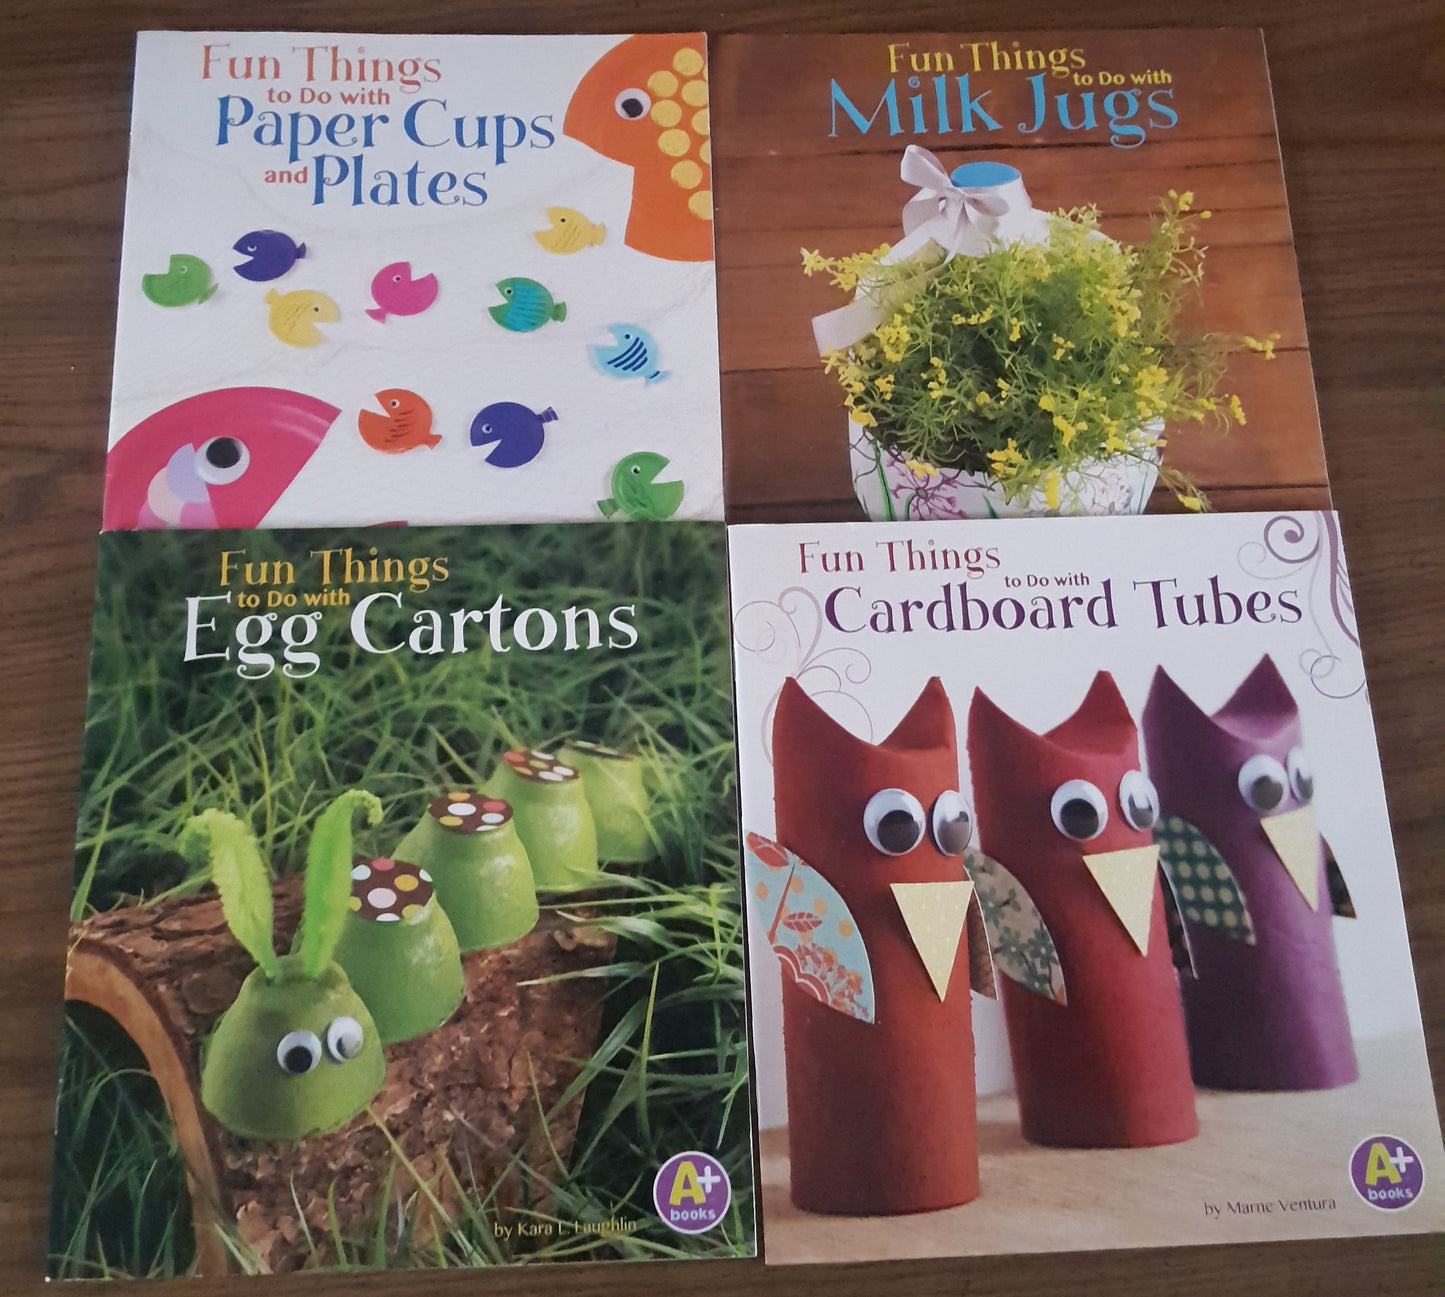 Fun Things to Do with….4 book set